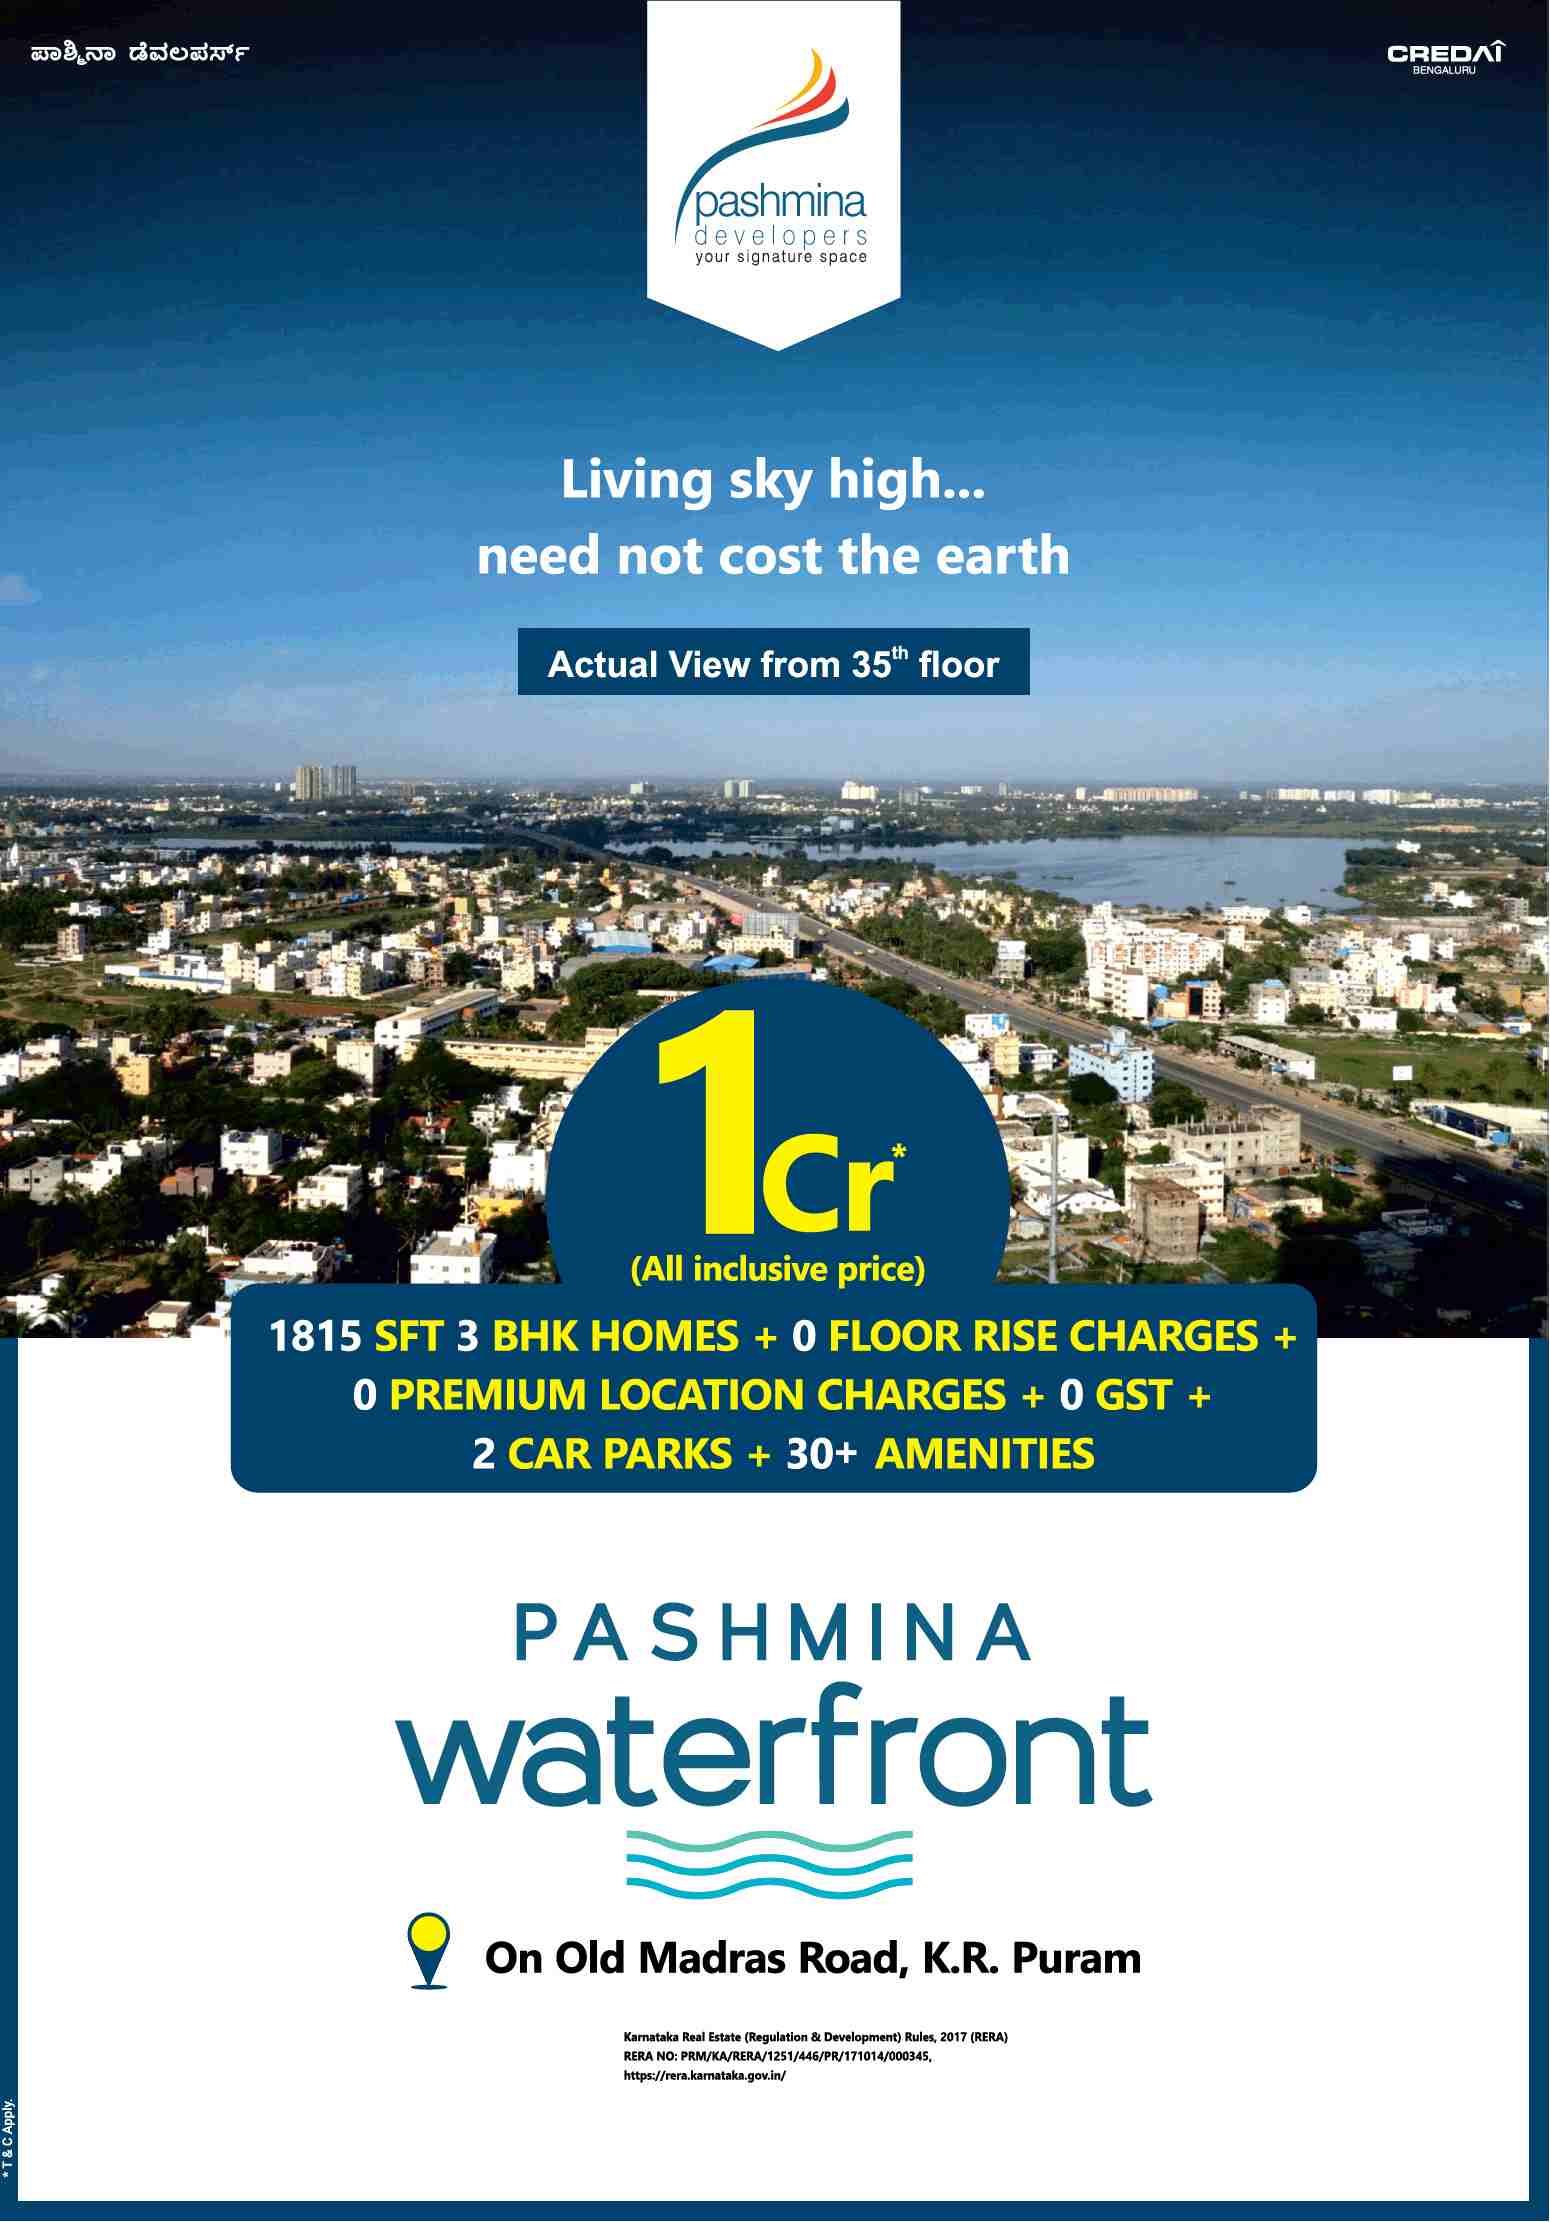 Book 3 BHK home with all inclusive price of Rs. 1 cr. at Pashmina Waterfront in Bangalore Update